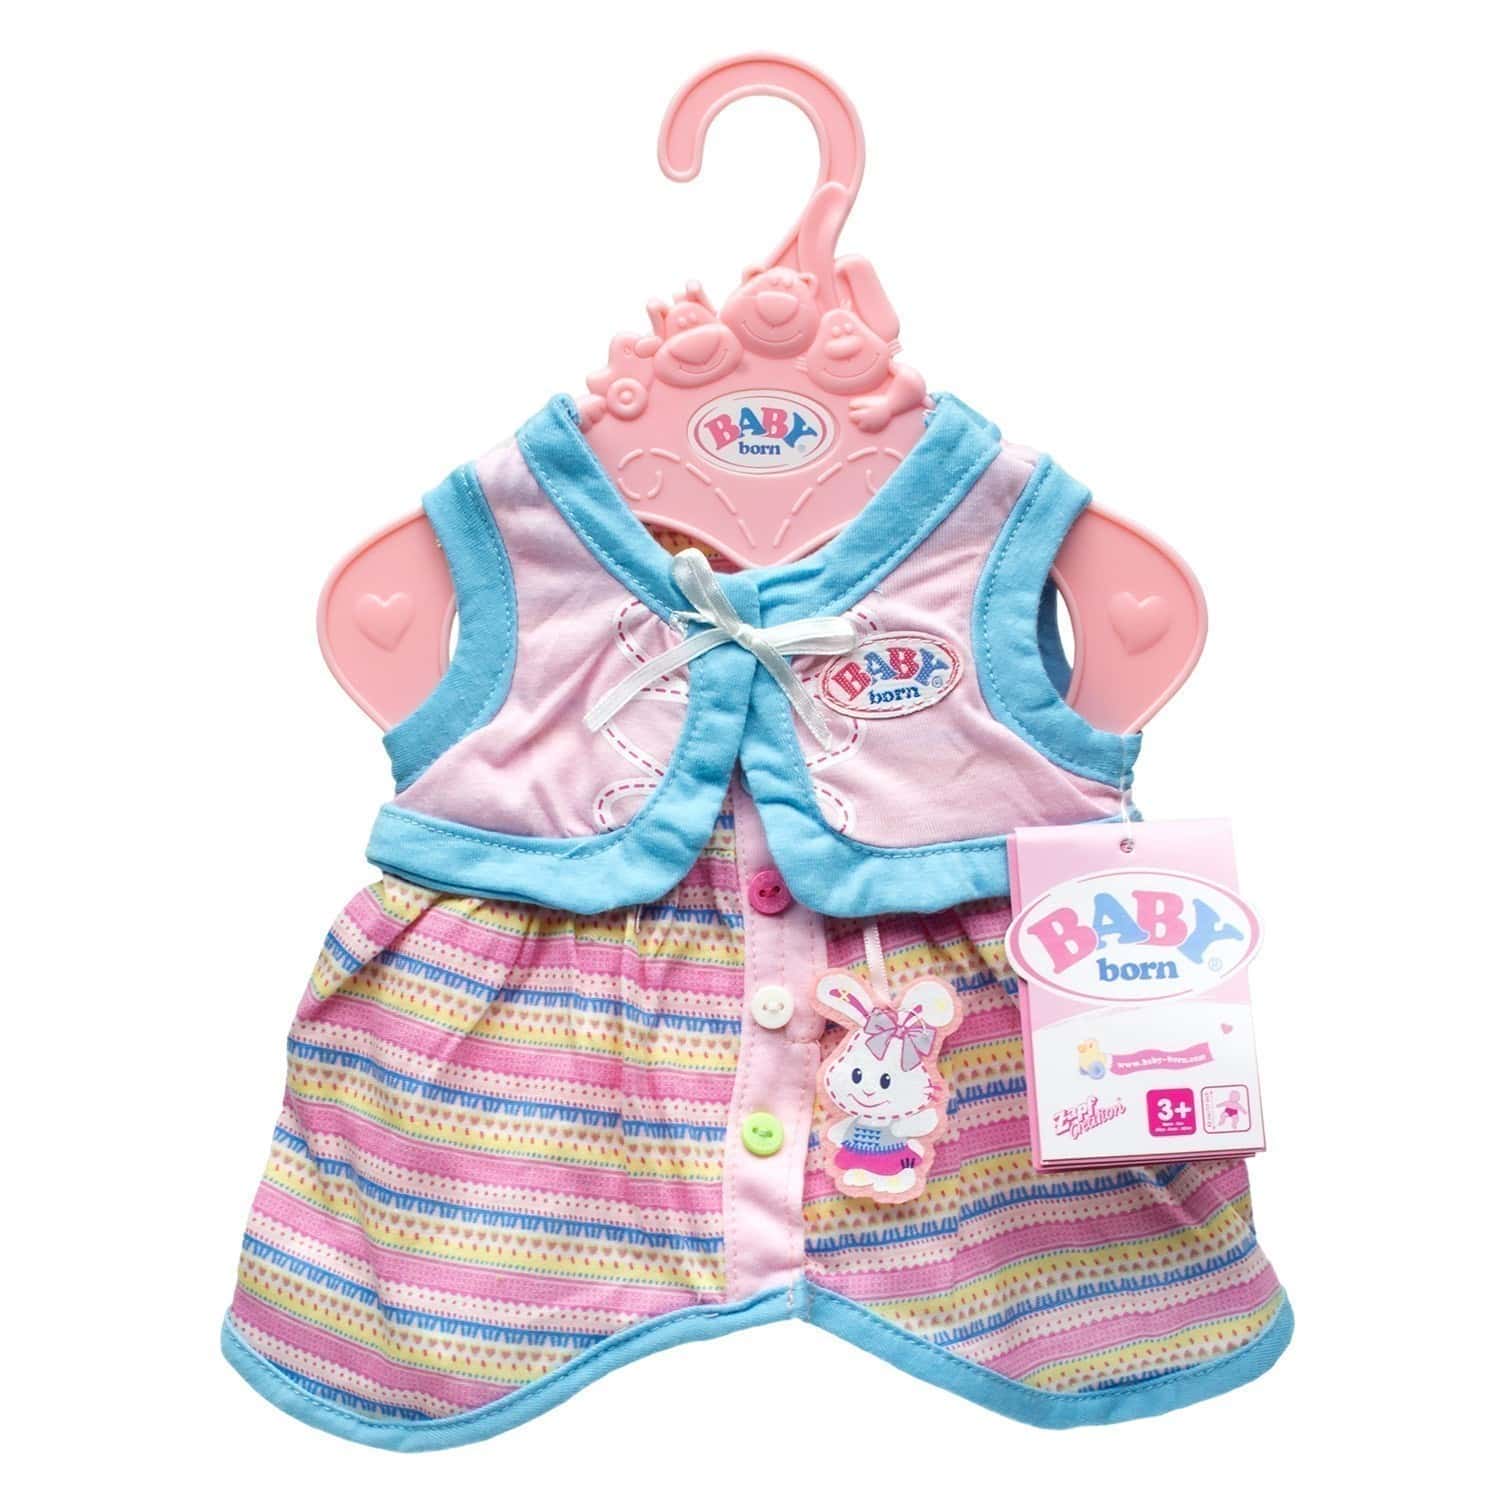 Baby Born - Baby Dress Collection - Pink Stripes